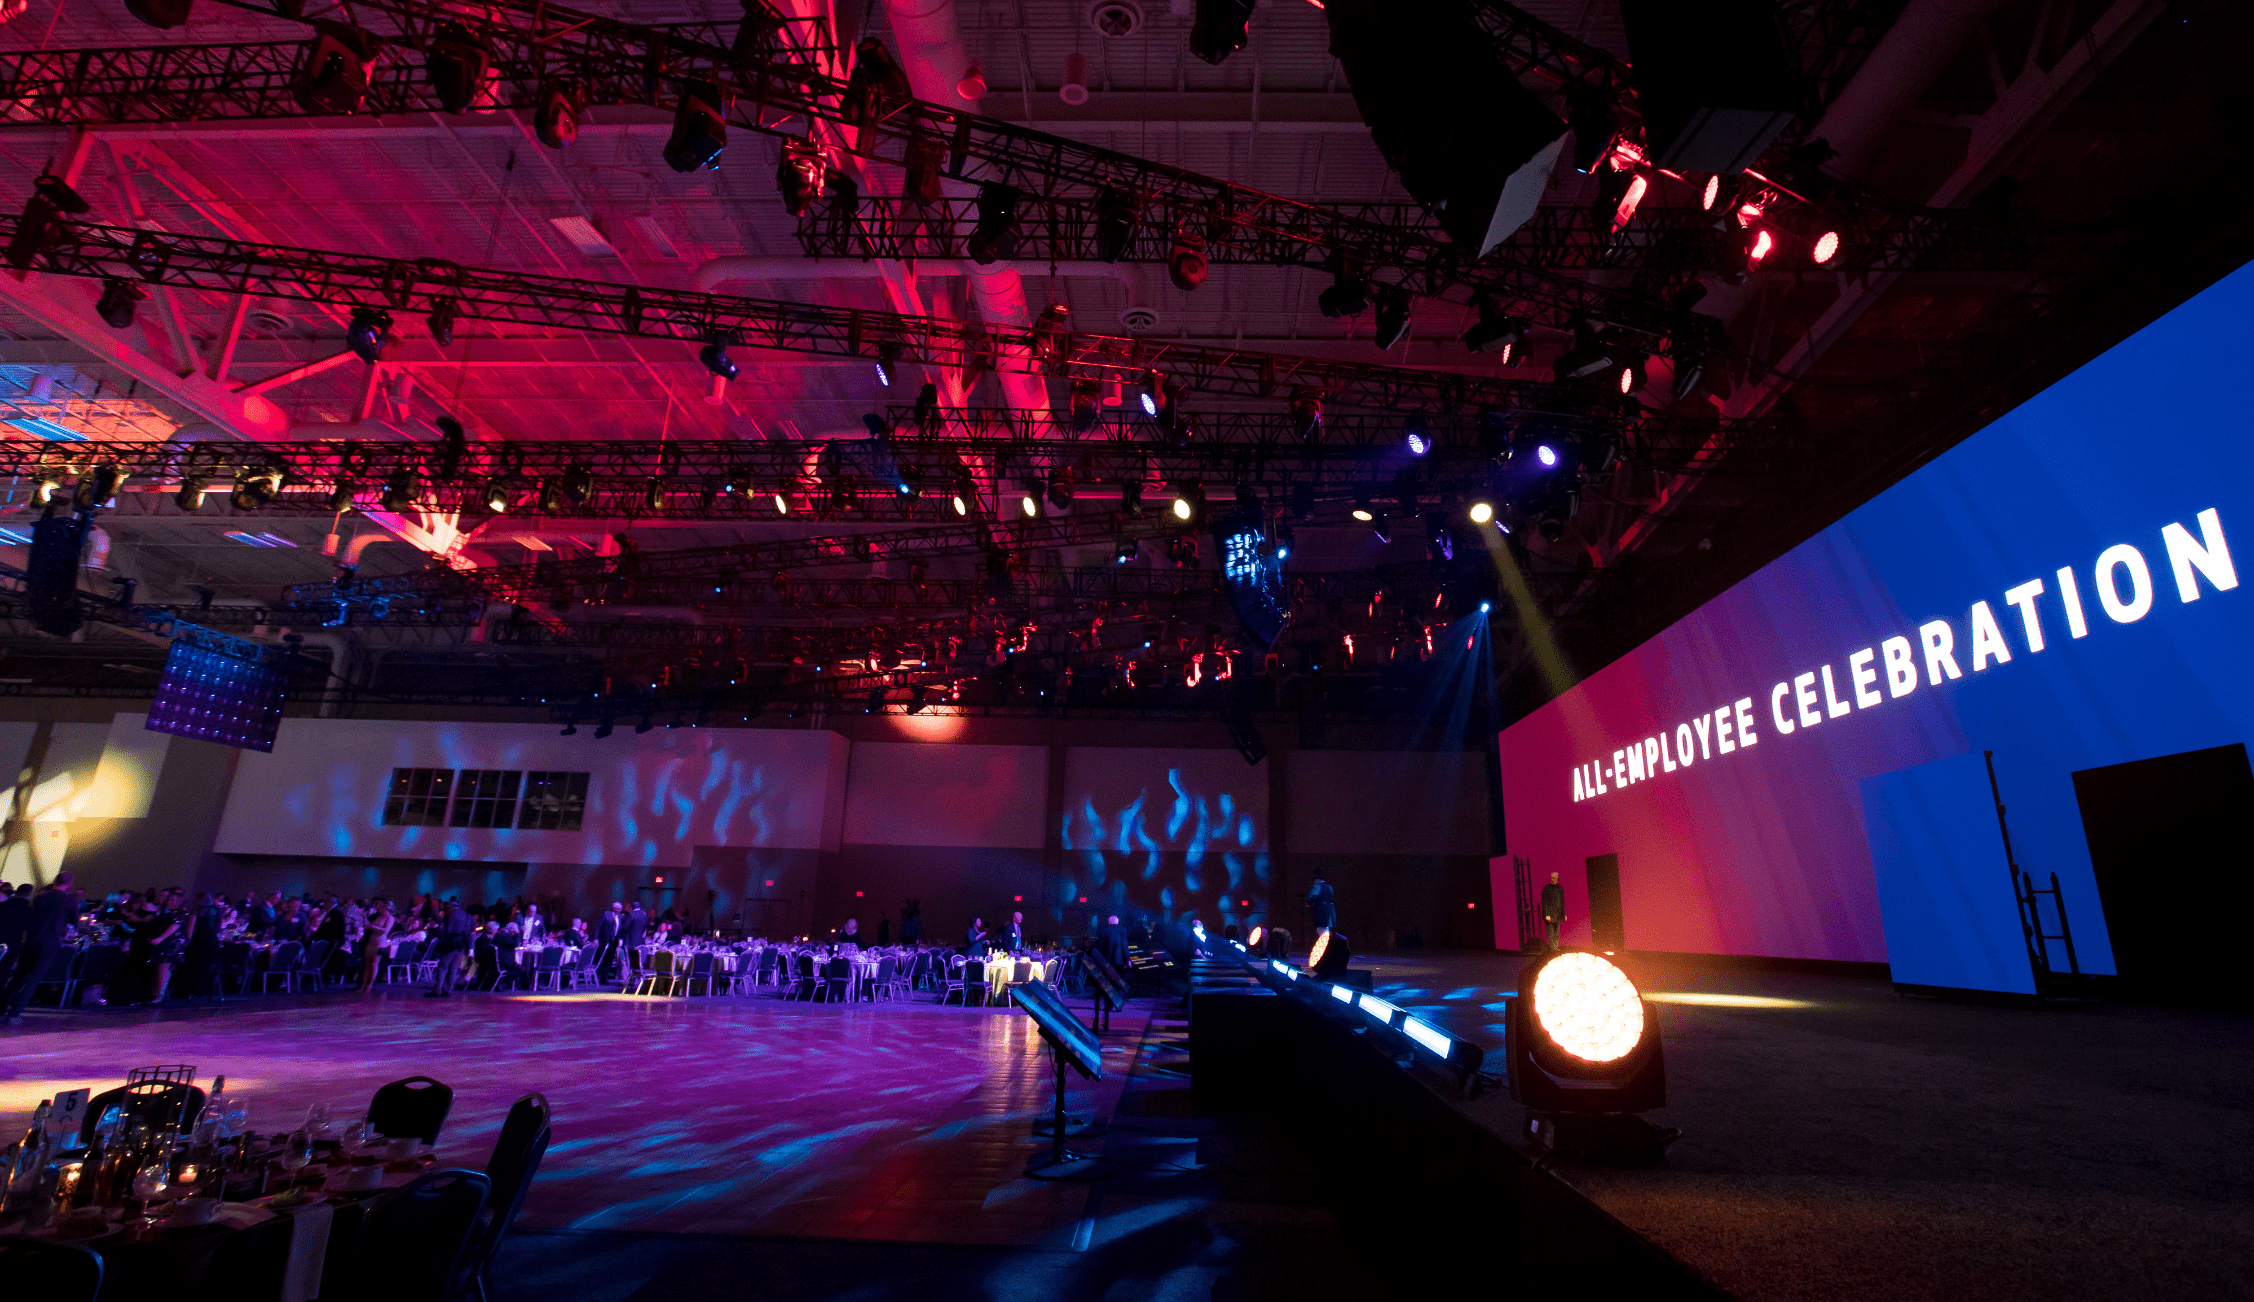 An All-Employee Celebration event in a venue with blue, purple, and red lighting